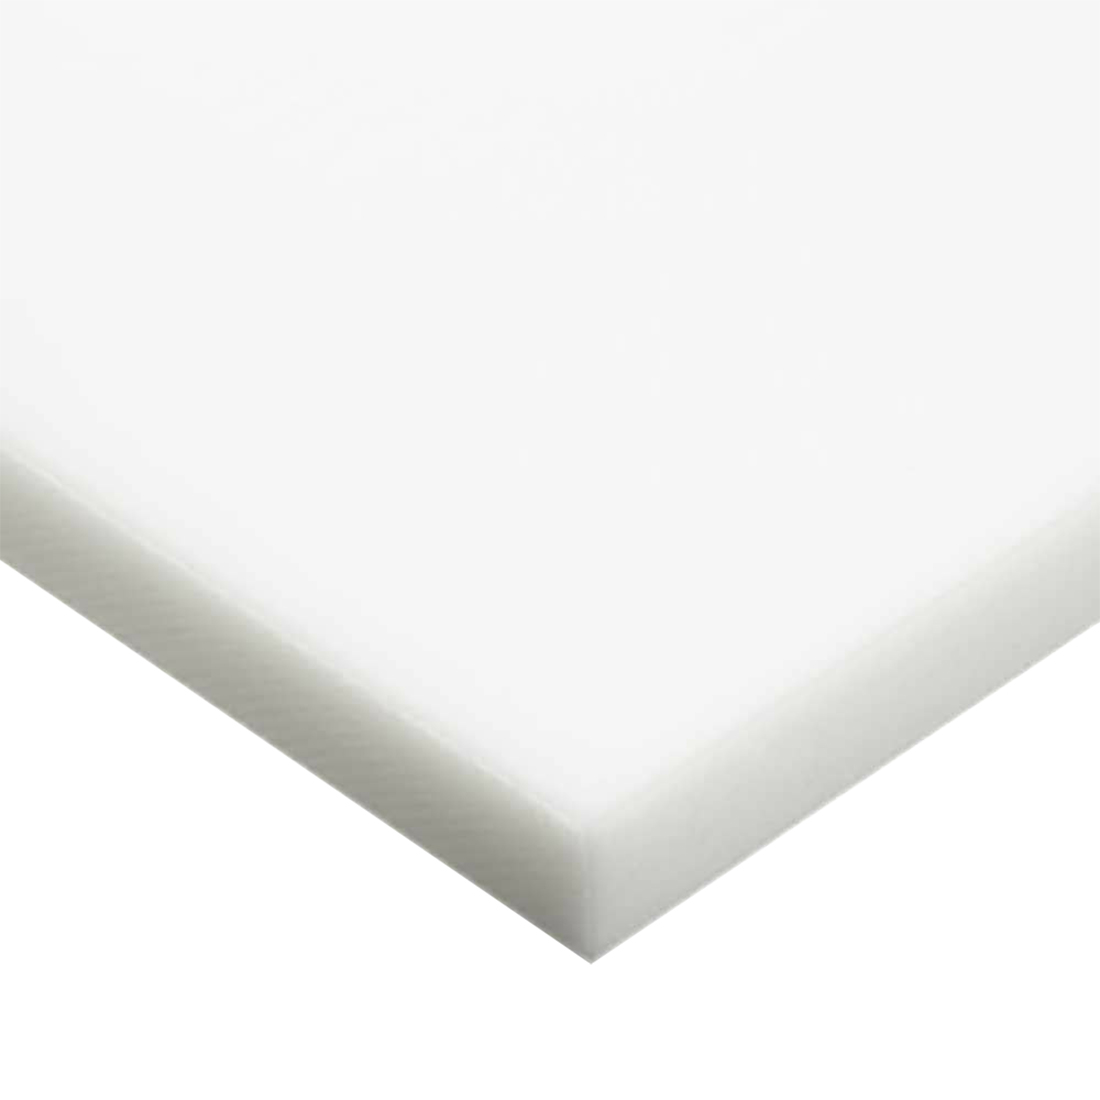 PTFE Sheeting - Moulded